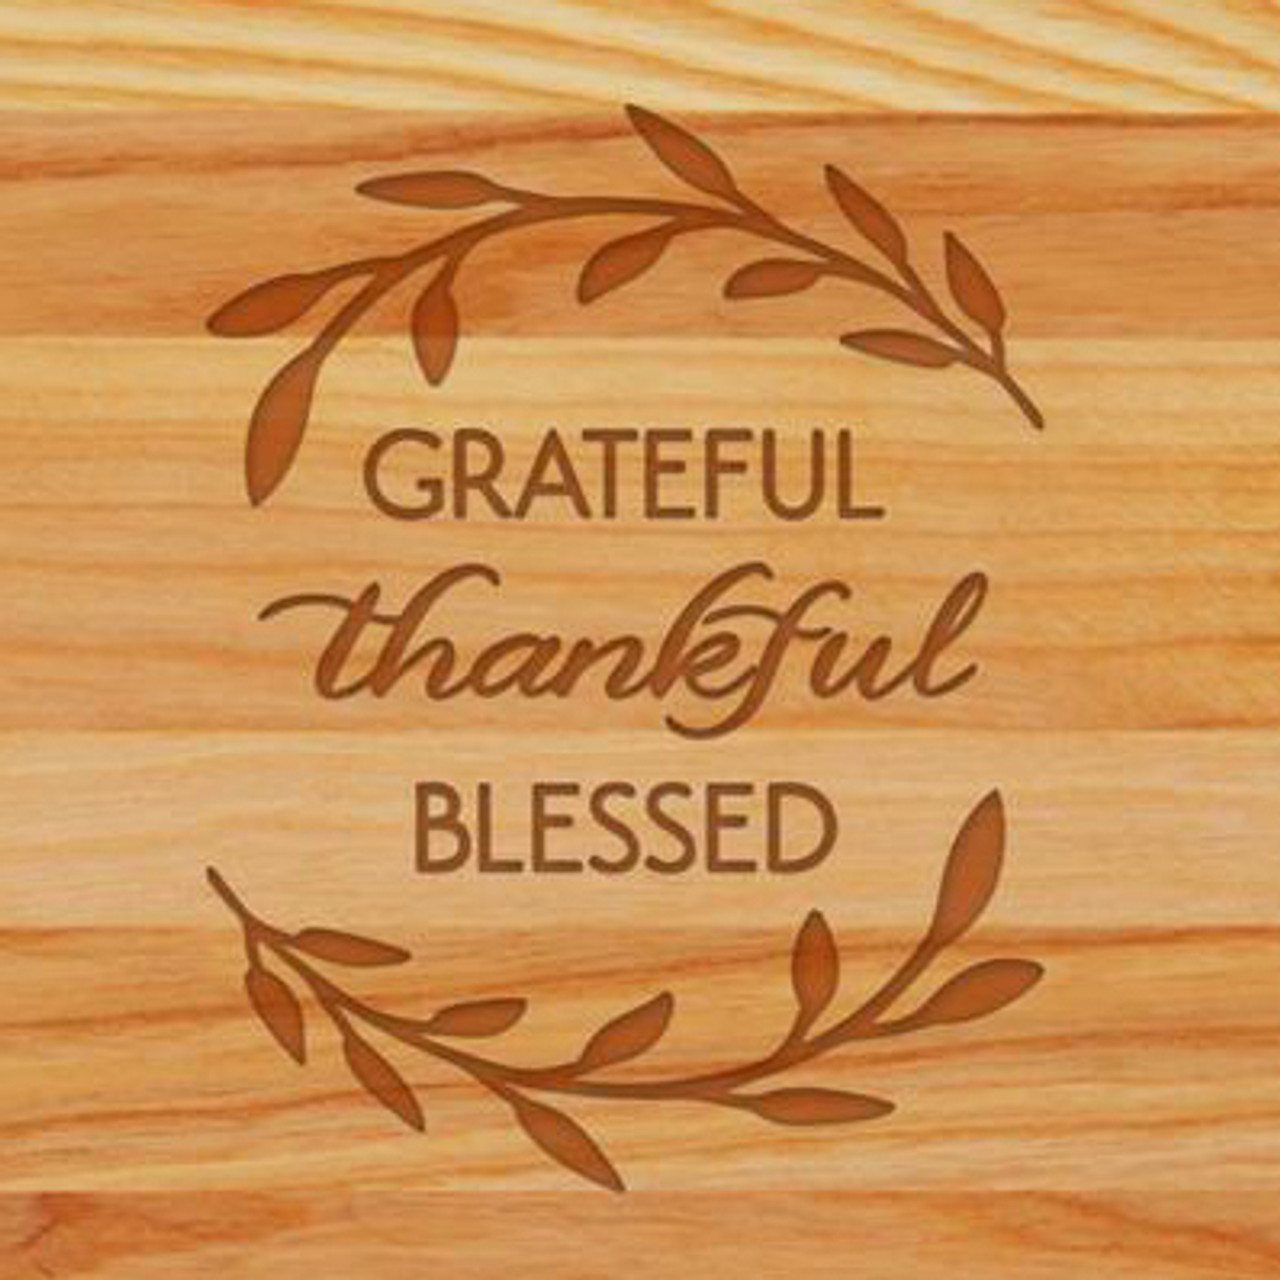 https://cdn11.bigcommerce.com/s-zts5l/images/stencil/1280x1280/products/5595/7085/grateful_blessed_wood__56019.1518724040.jpg?c=2